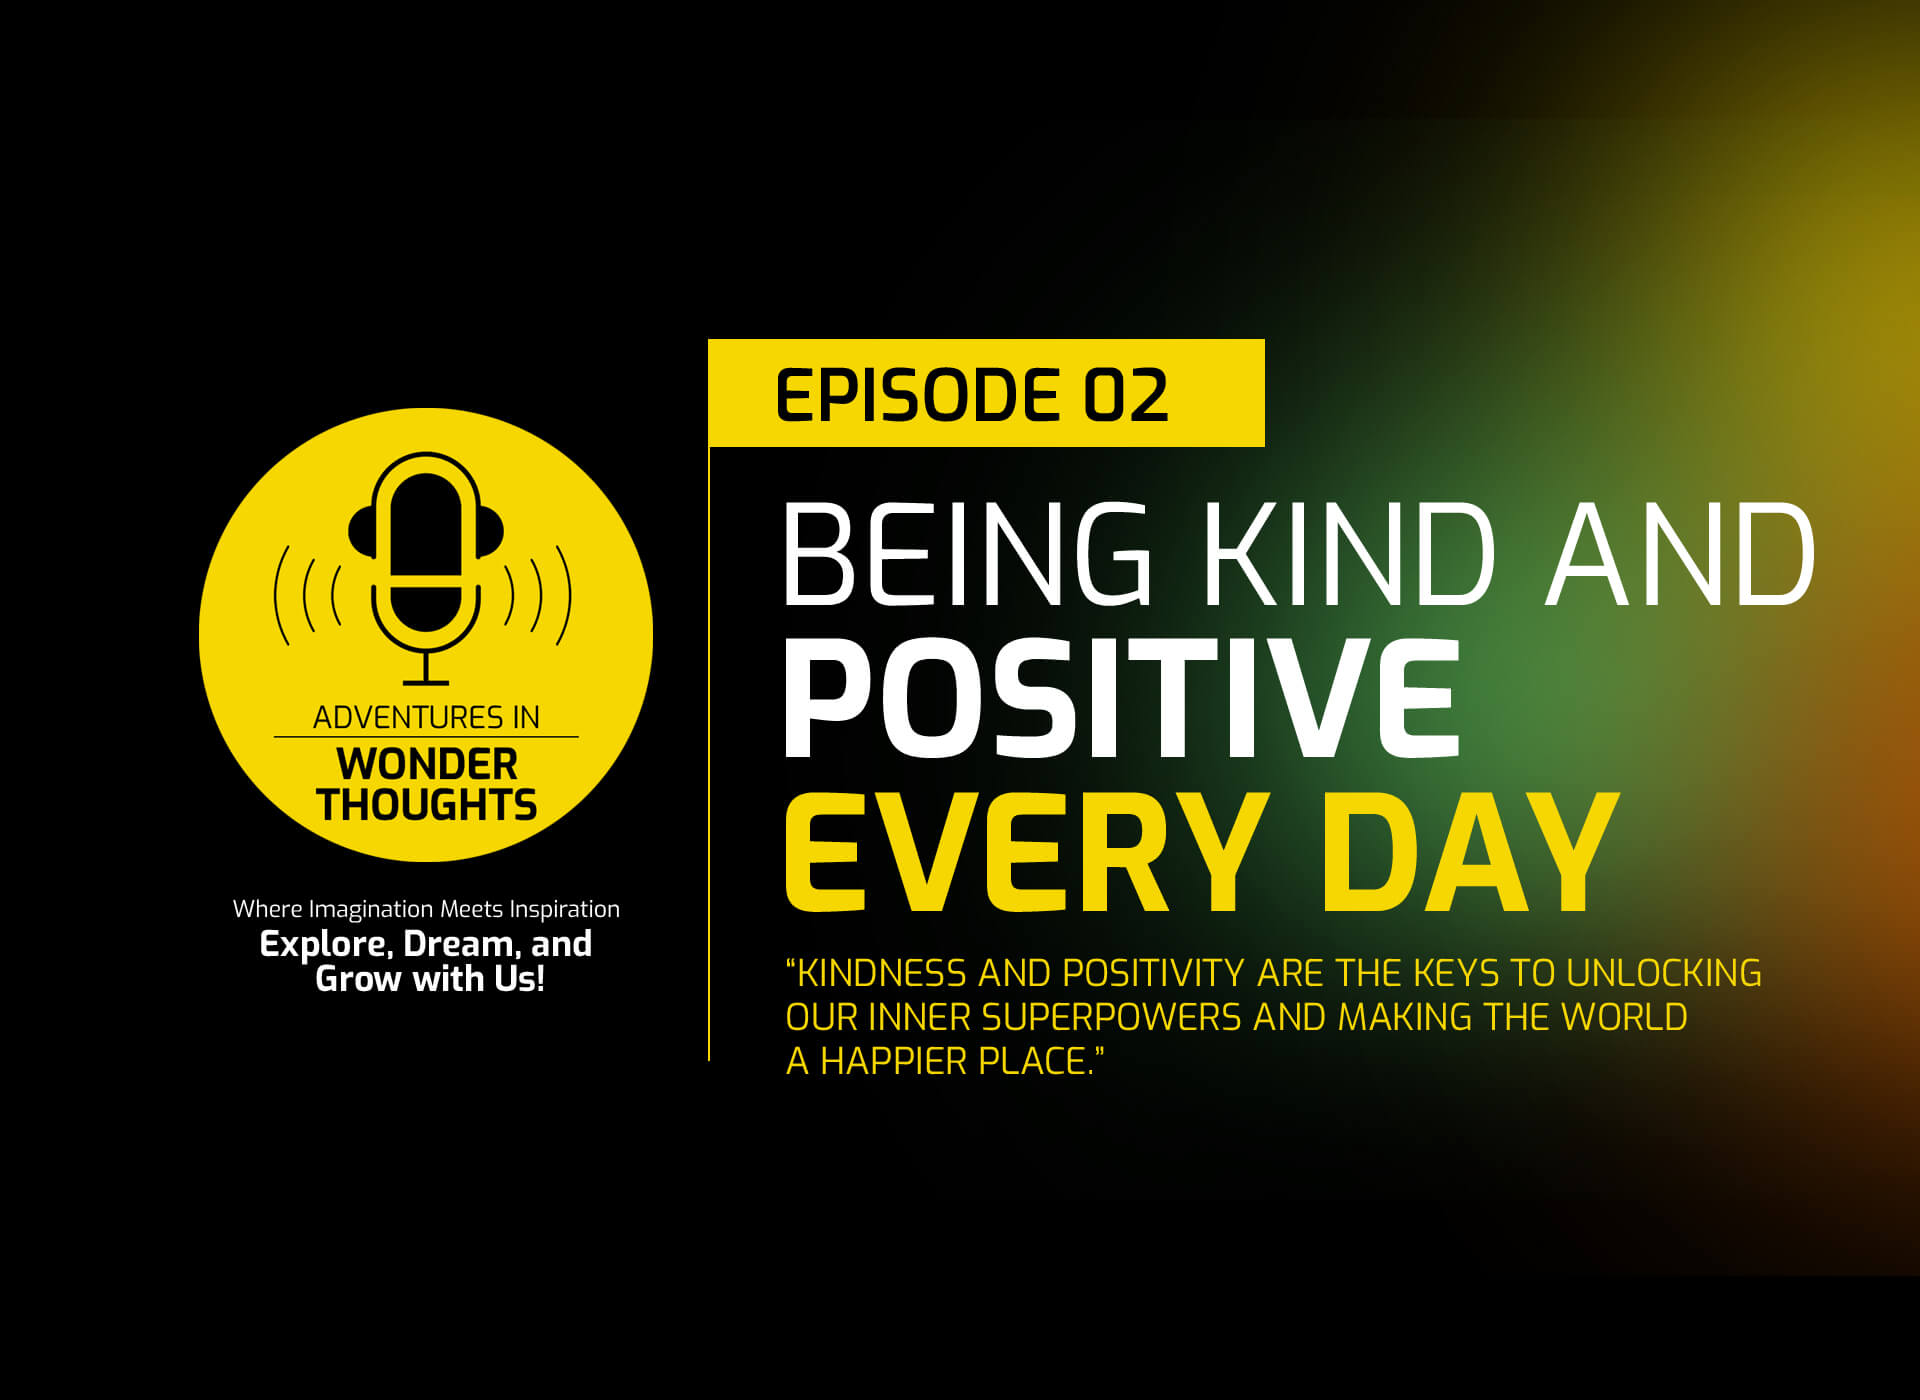 Episode 02: Being Kind and Positive Every Day